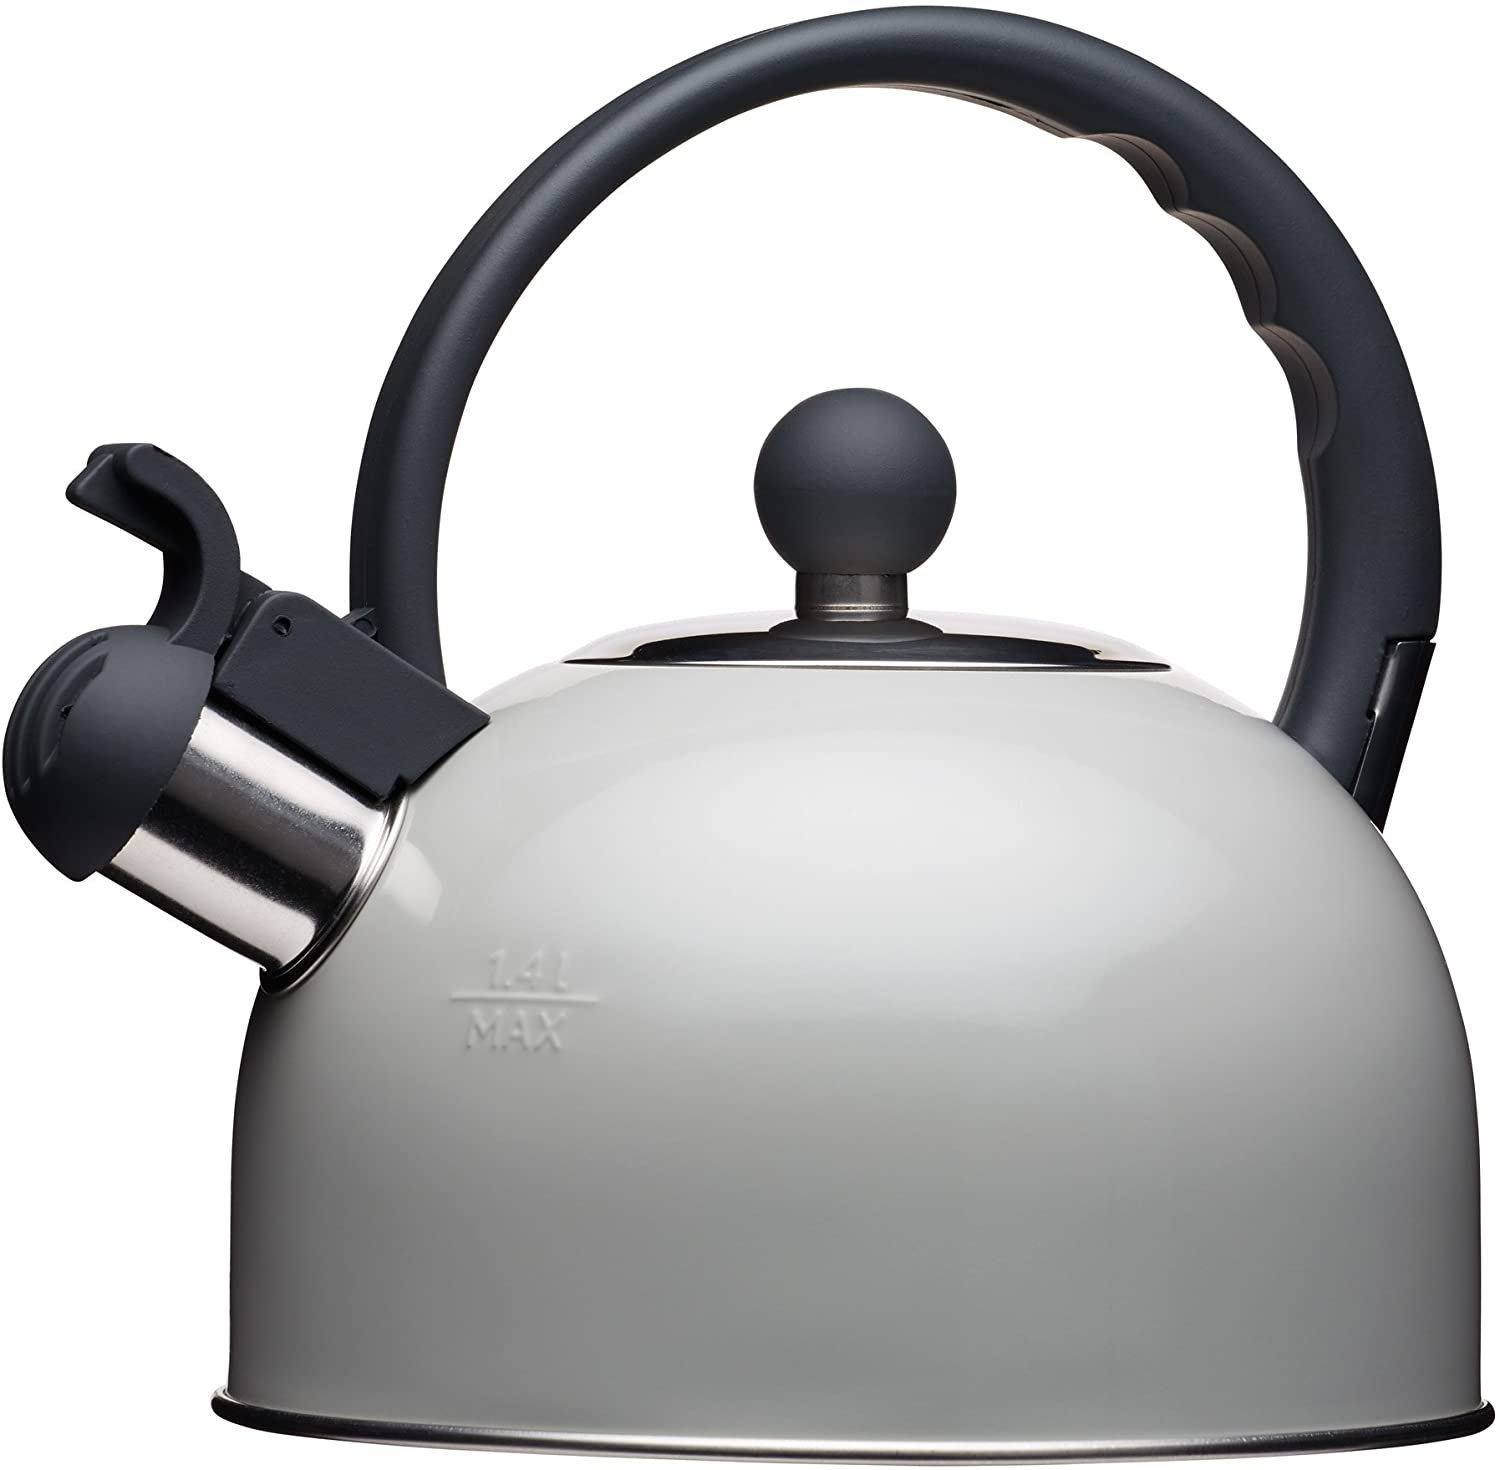 Kitchen Craft Induction-suitable whistling kettle of the Living Nostalgia series by KitchenCraft, 1.3 L, kettle in antique cream color, metal, gray, 18 x 21.5 x 21 cm